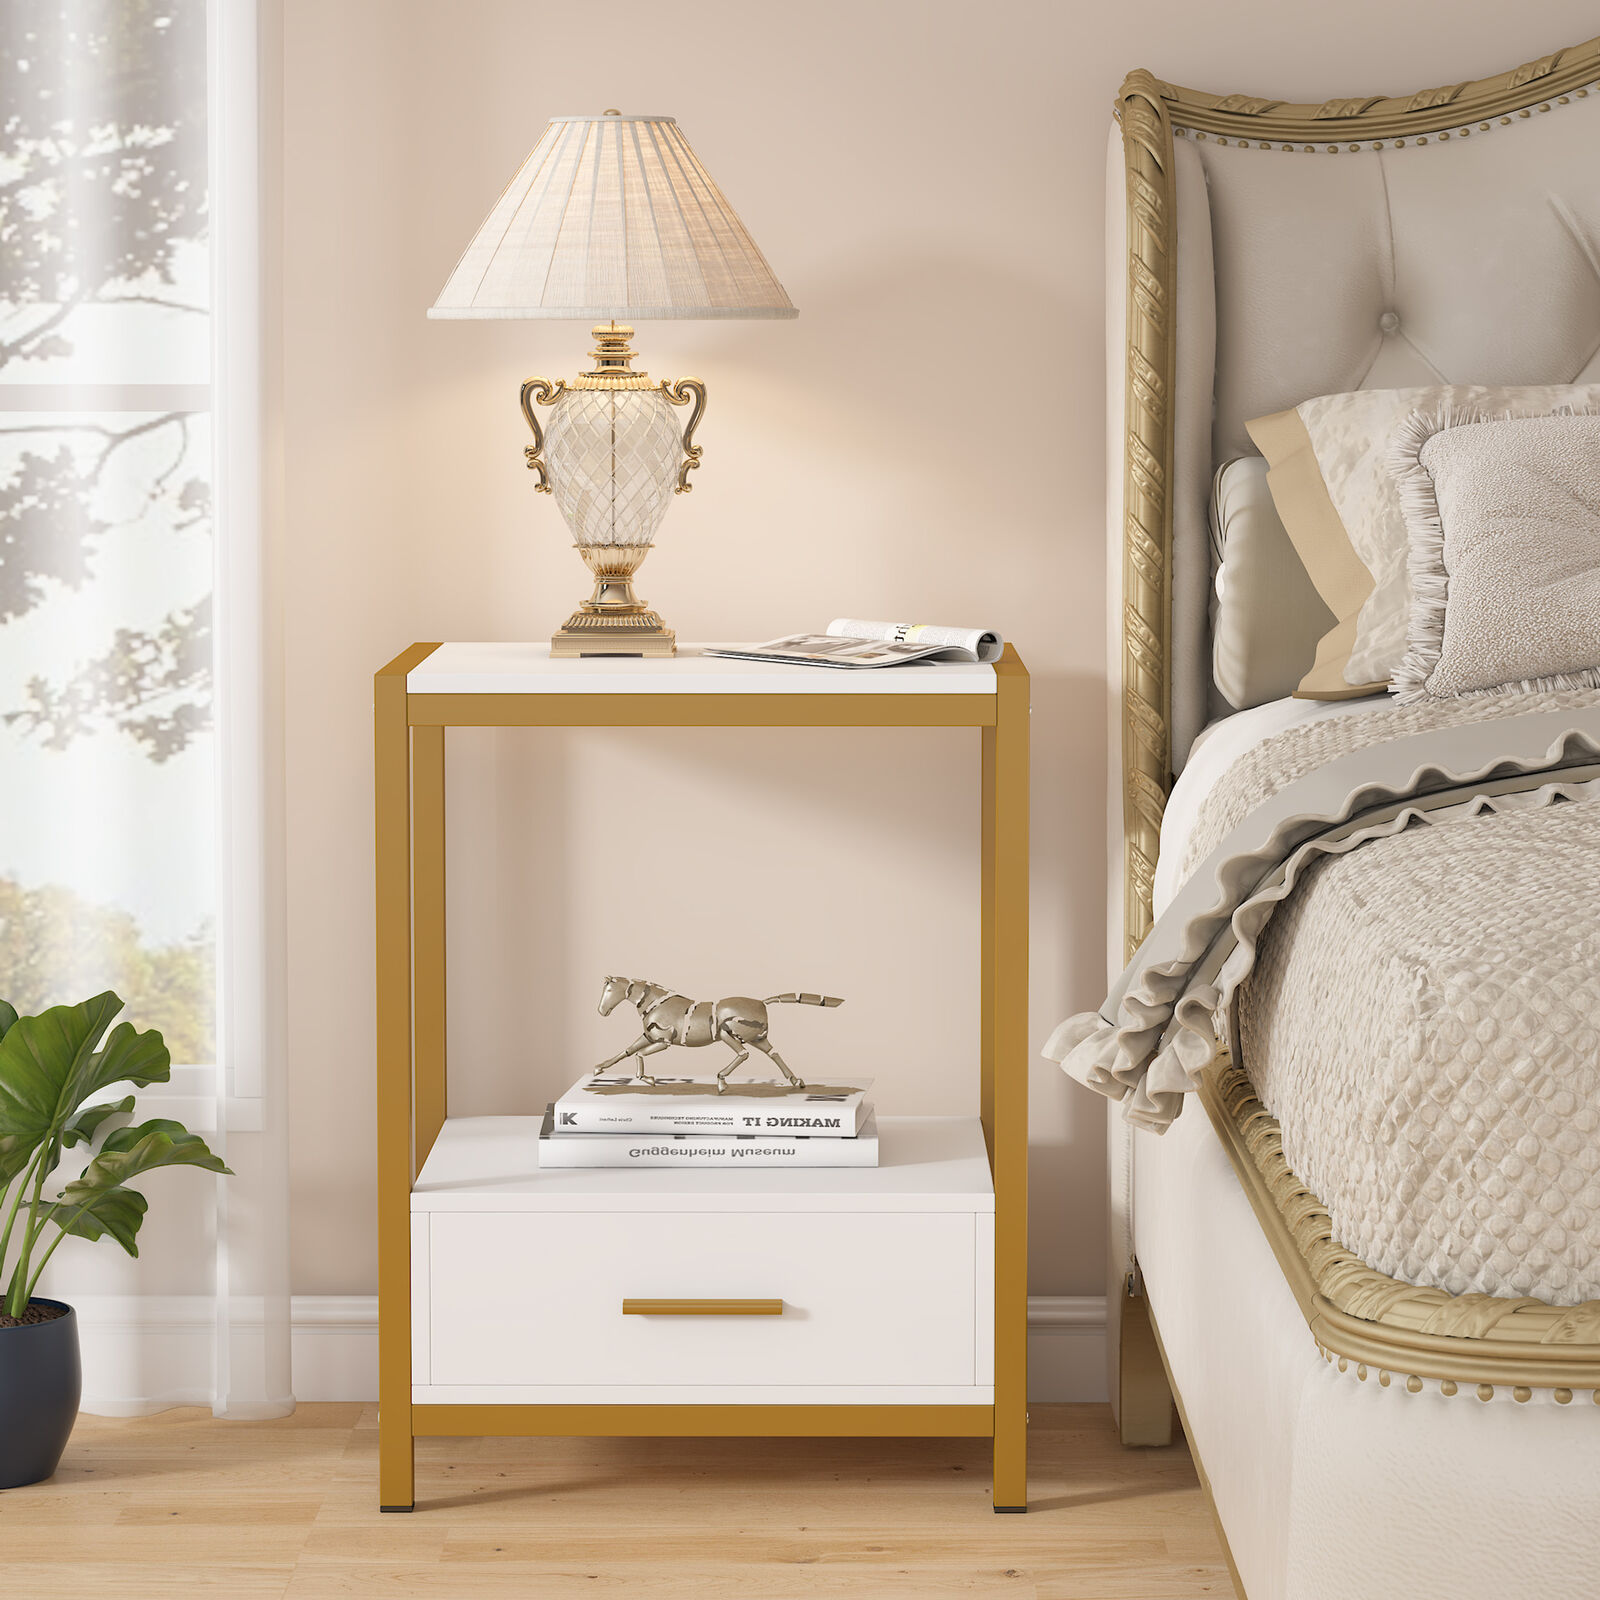 End Table Side Table Bedside Table W/ Drawer For Living Room, Bedroom Nightstand